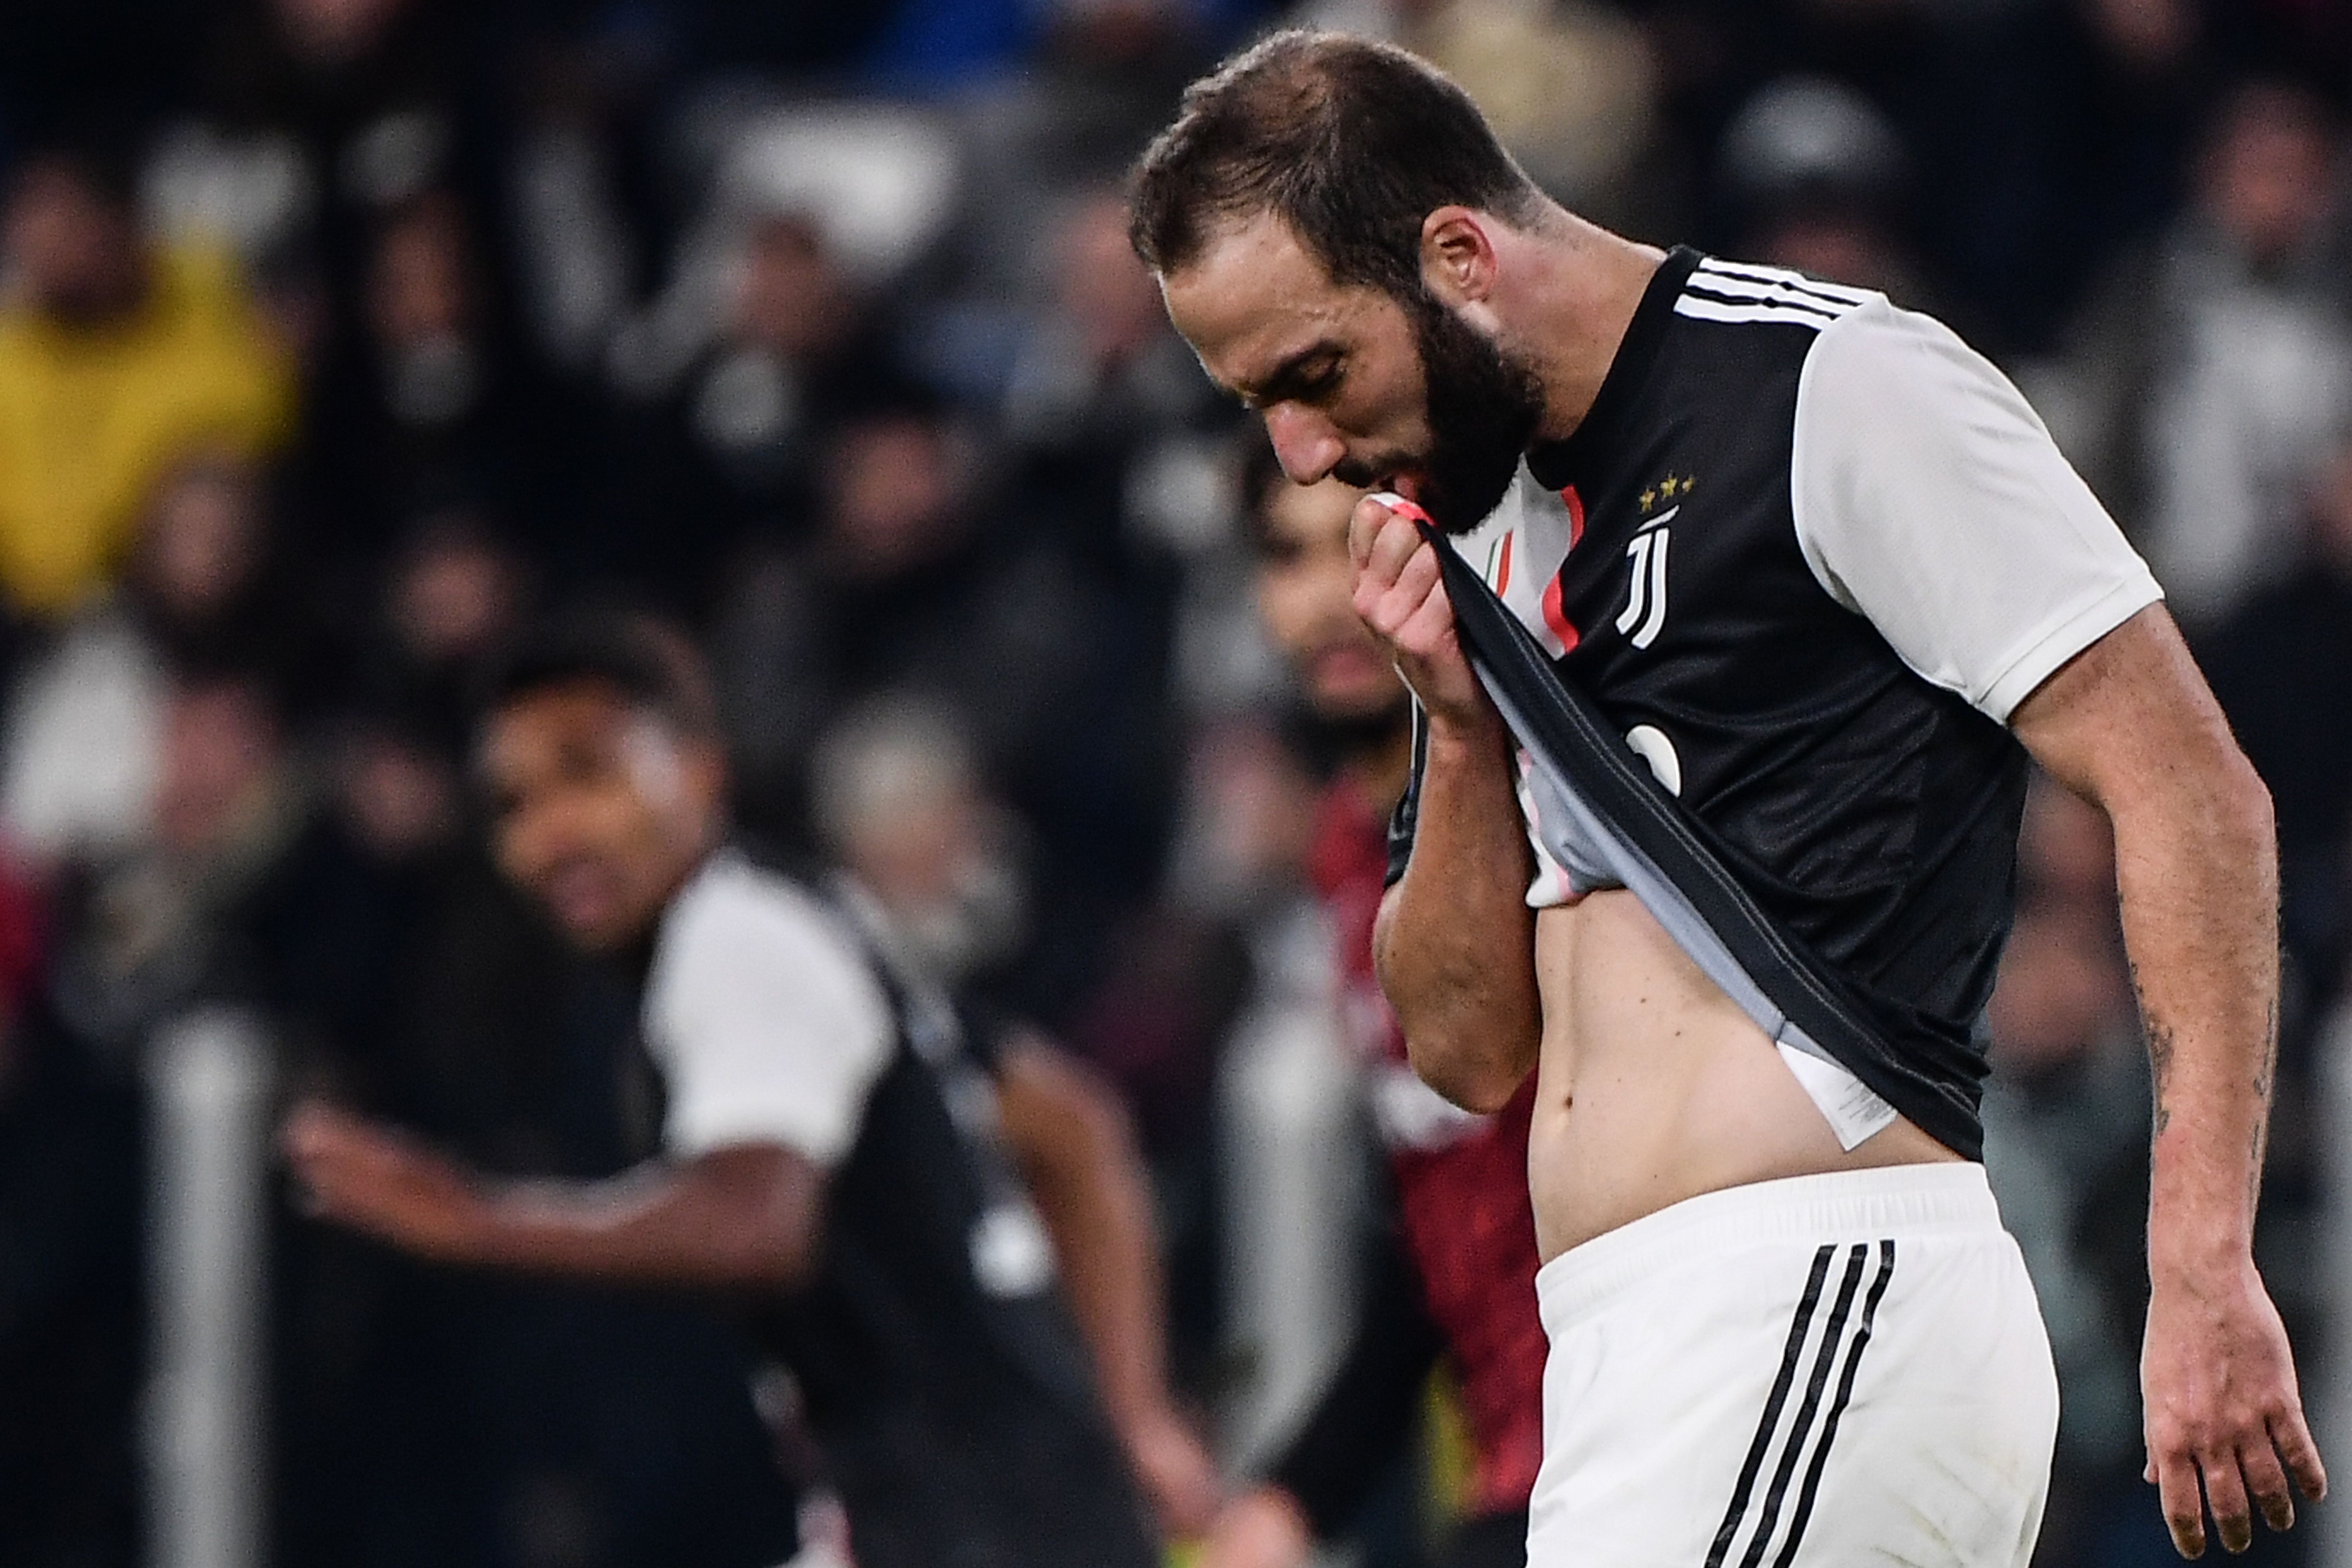 Time for Higuain to step up (Photo by MARCO BERTORELLO/AFP via Getty Images)